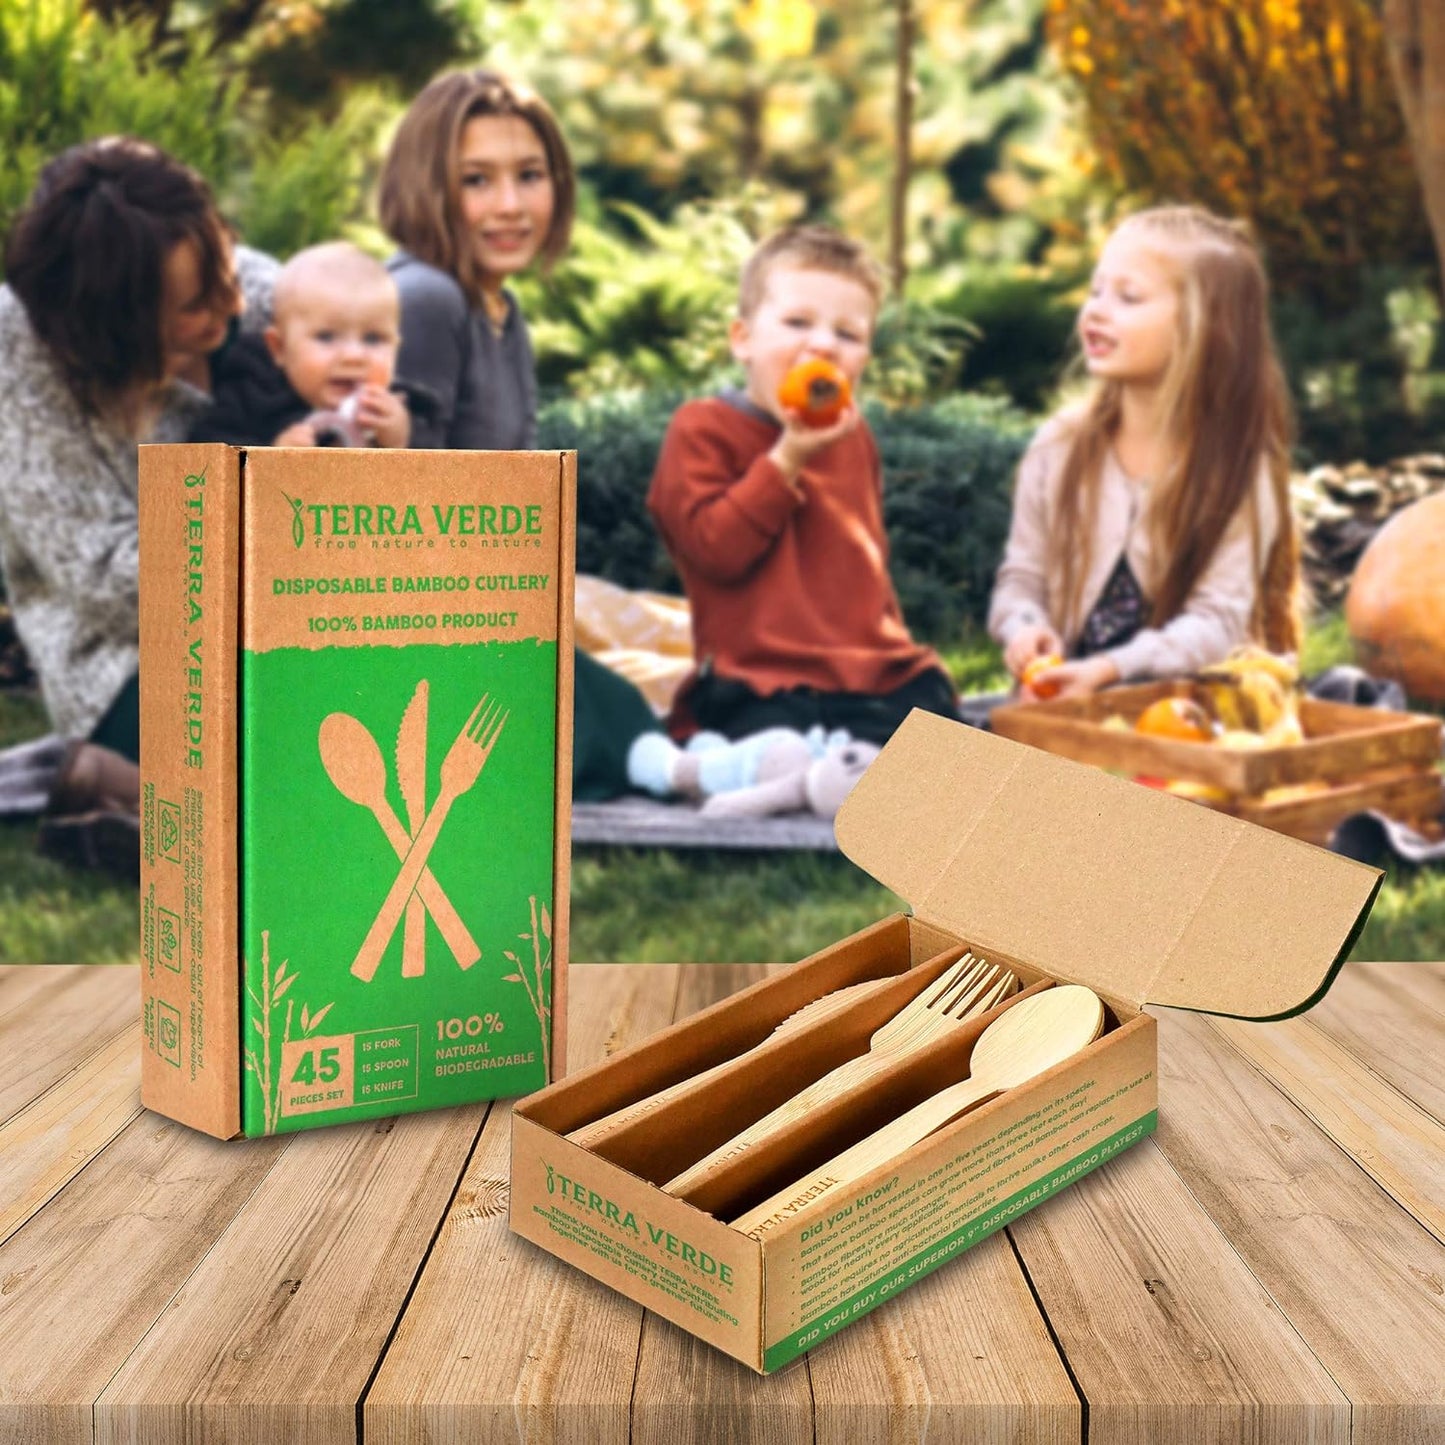 Disposable Cutlery Bamboo not Birchwood l Eco Friendly Biodegradable Compostable l Set of 45 Pcs (15 Forks 15 Spoons 15 Knives) for Party BBQ Picnic